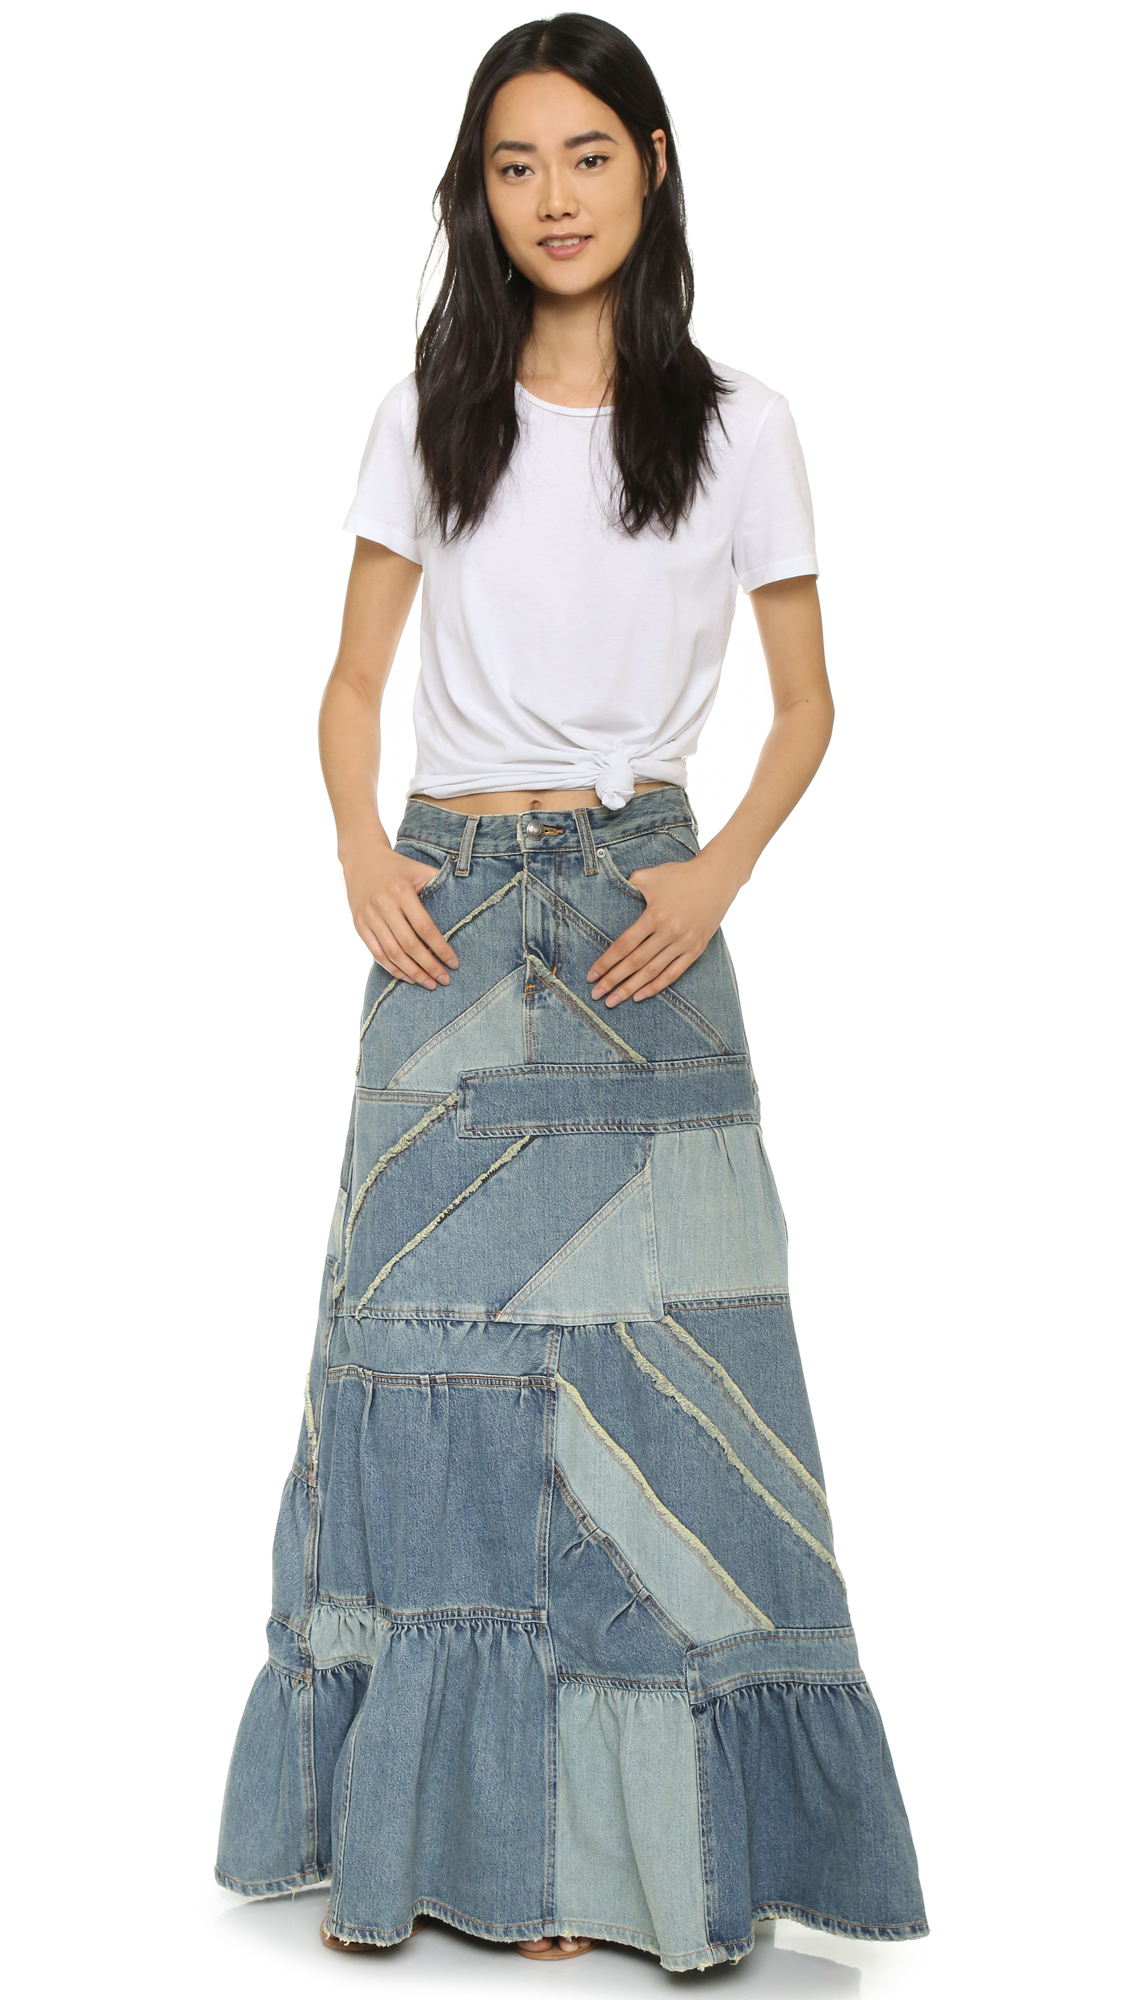 Lyst - Marc By Marc Jacobs Patchwork Denim Skirt in Blue